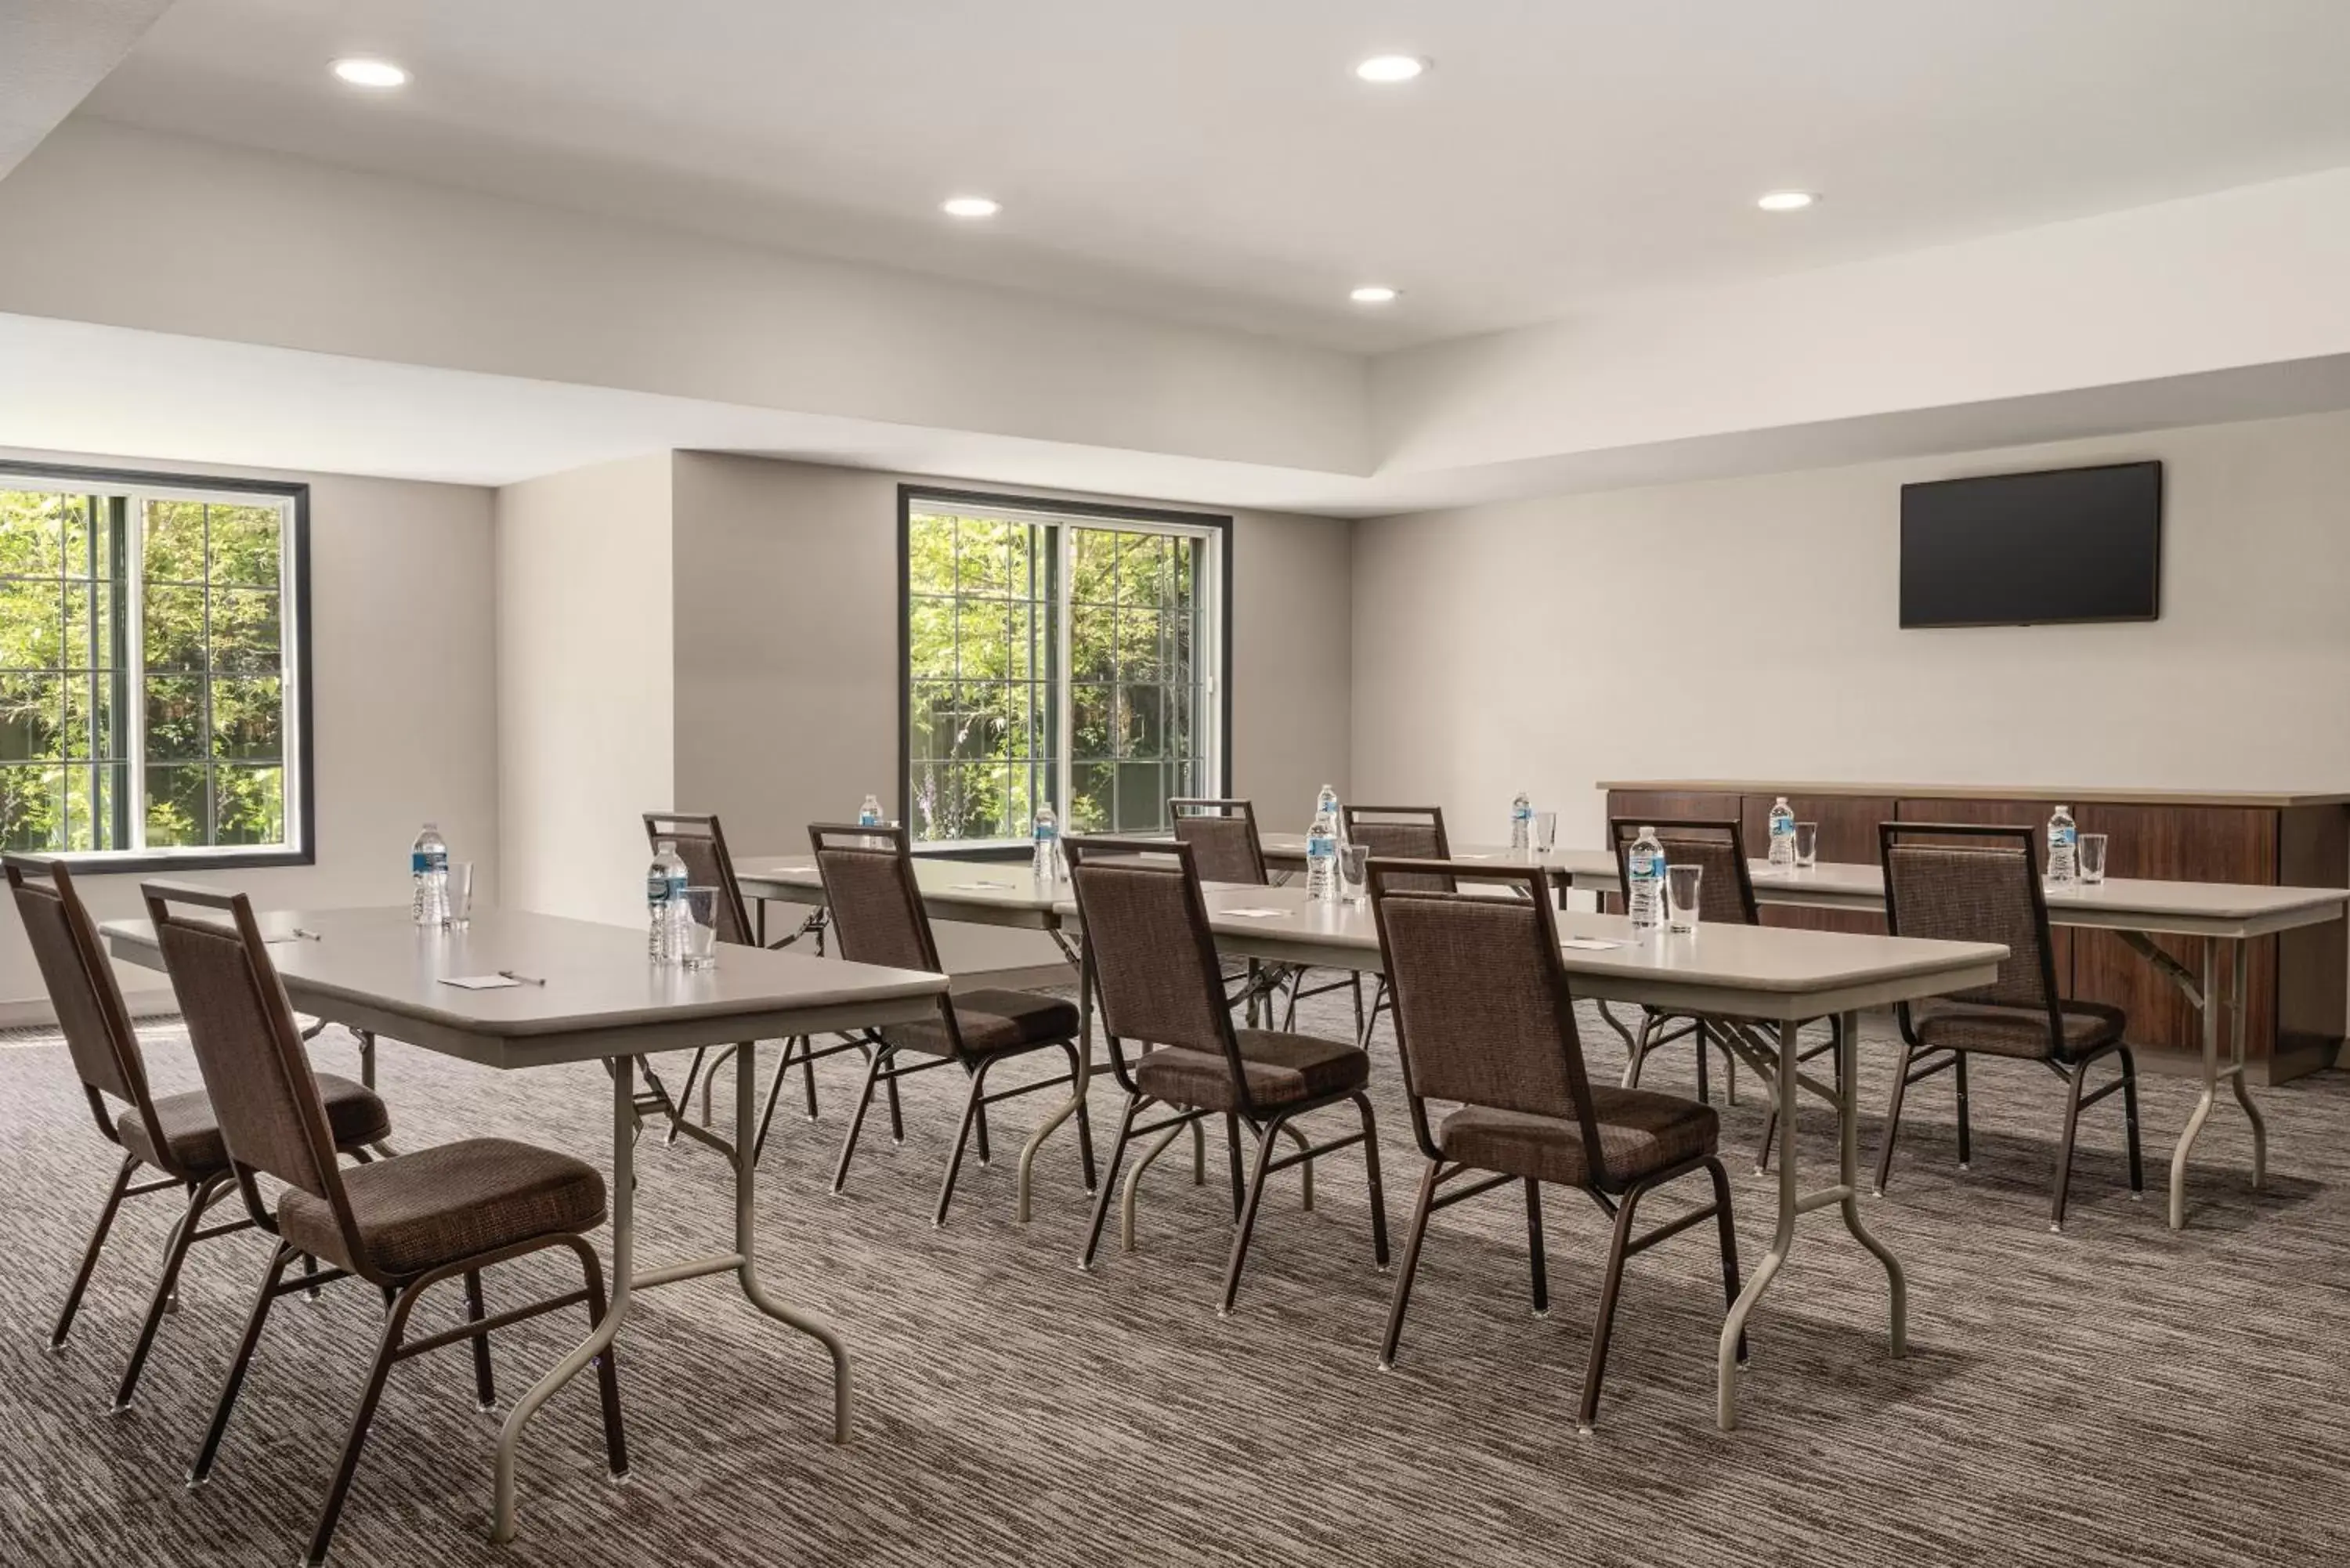 Business facilities in Country Inn & Suites by Radisson, Detroit Lakes, MN